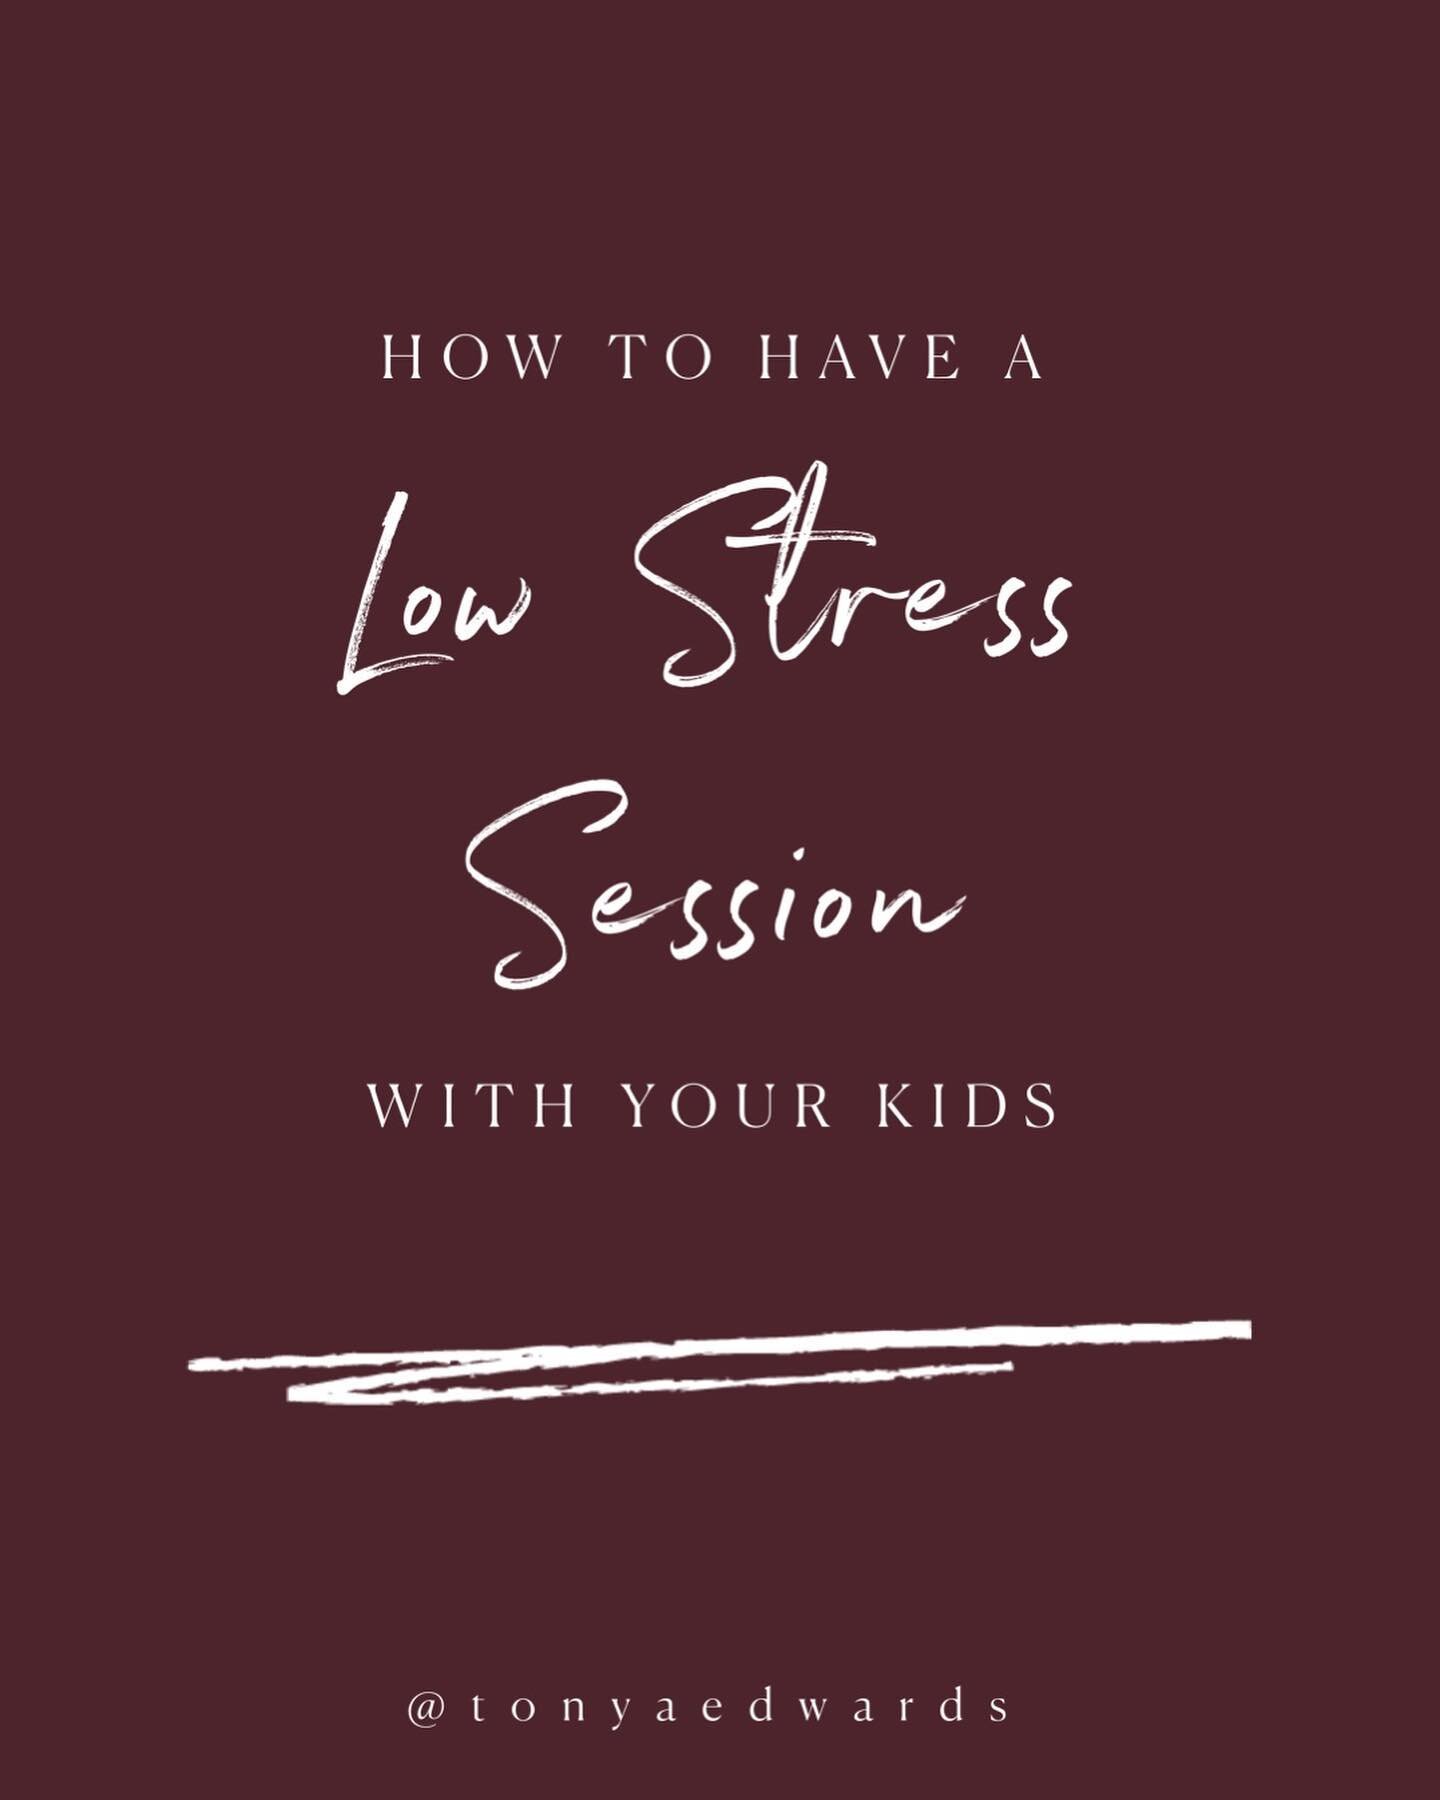 Family photo sessions are an opportunity to have your memories captured, so let&rsquo;s make them good memories. 

Here are four simple things to keep in mind to relieve some of the stress of your next family session.

#1 Let Kids Be Kids

#2 Play Wi